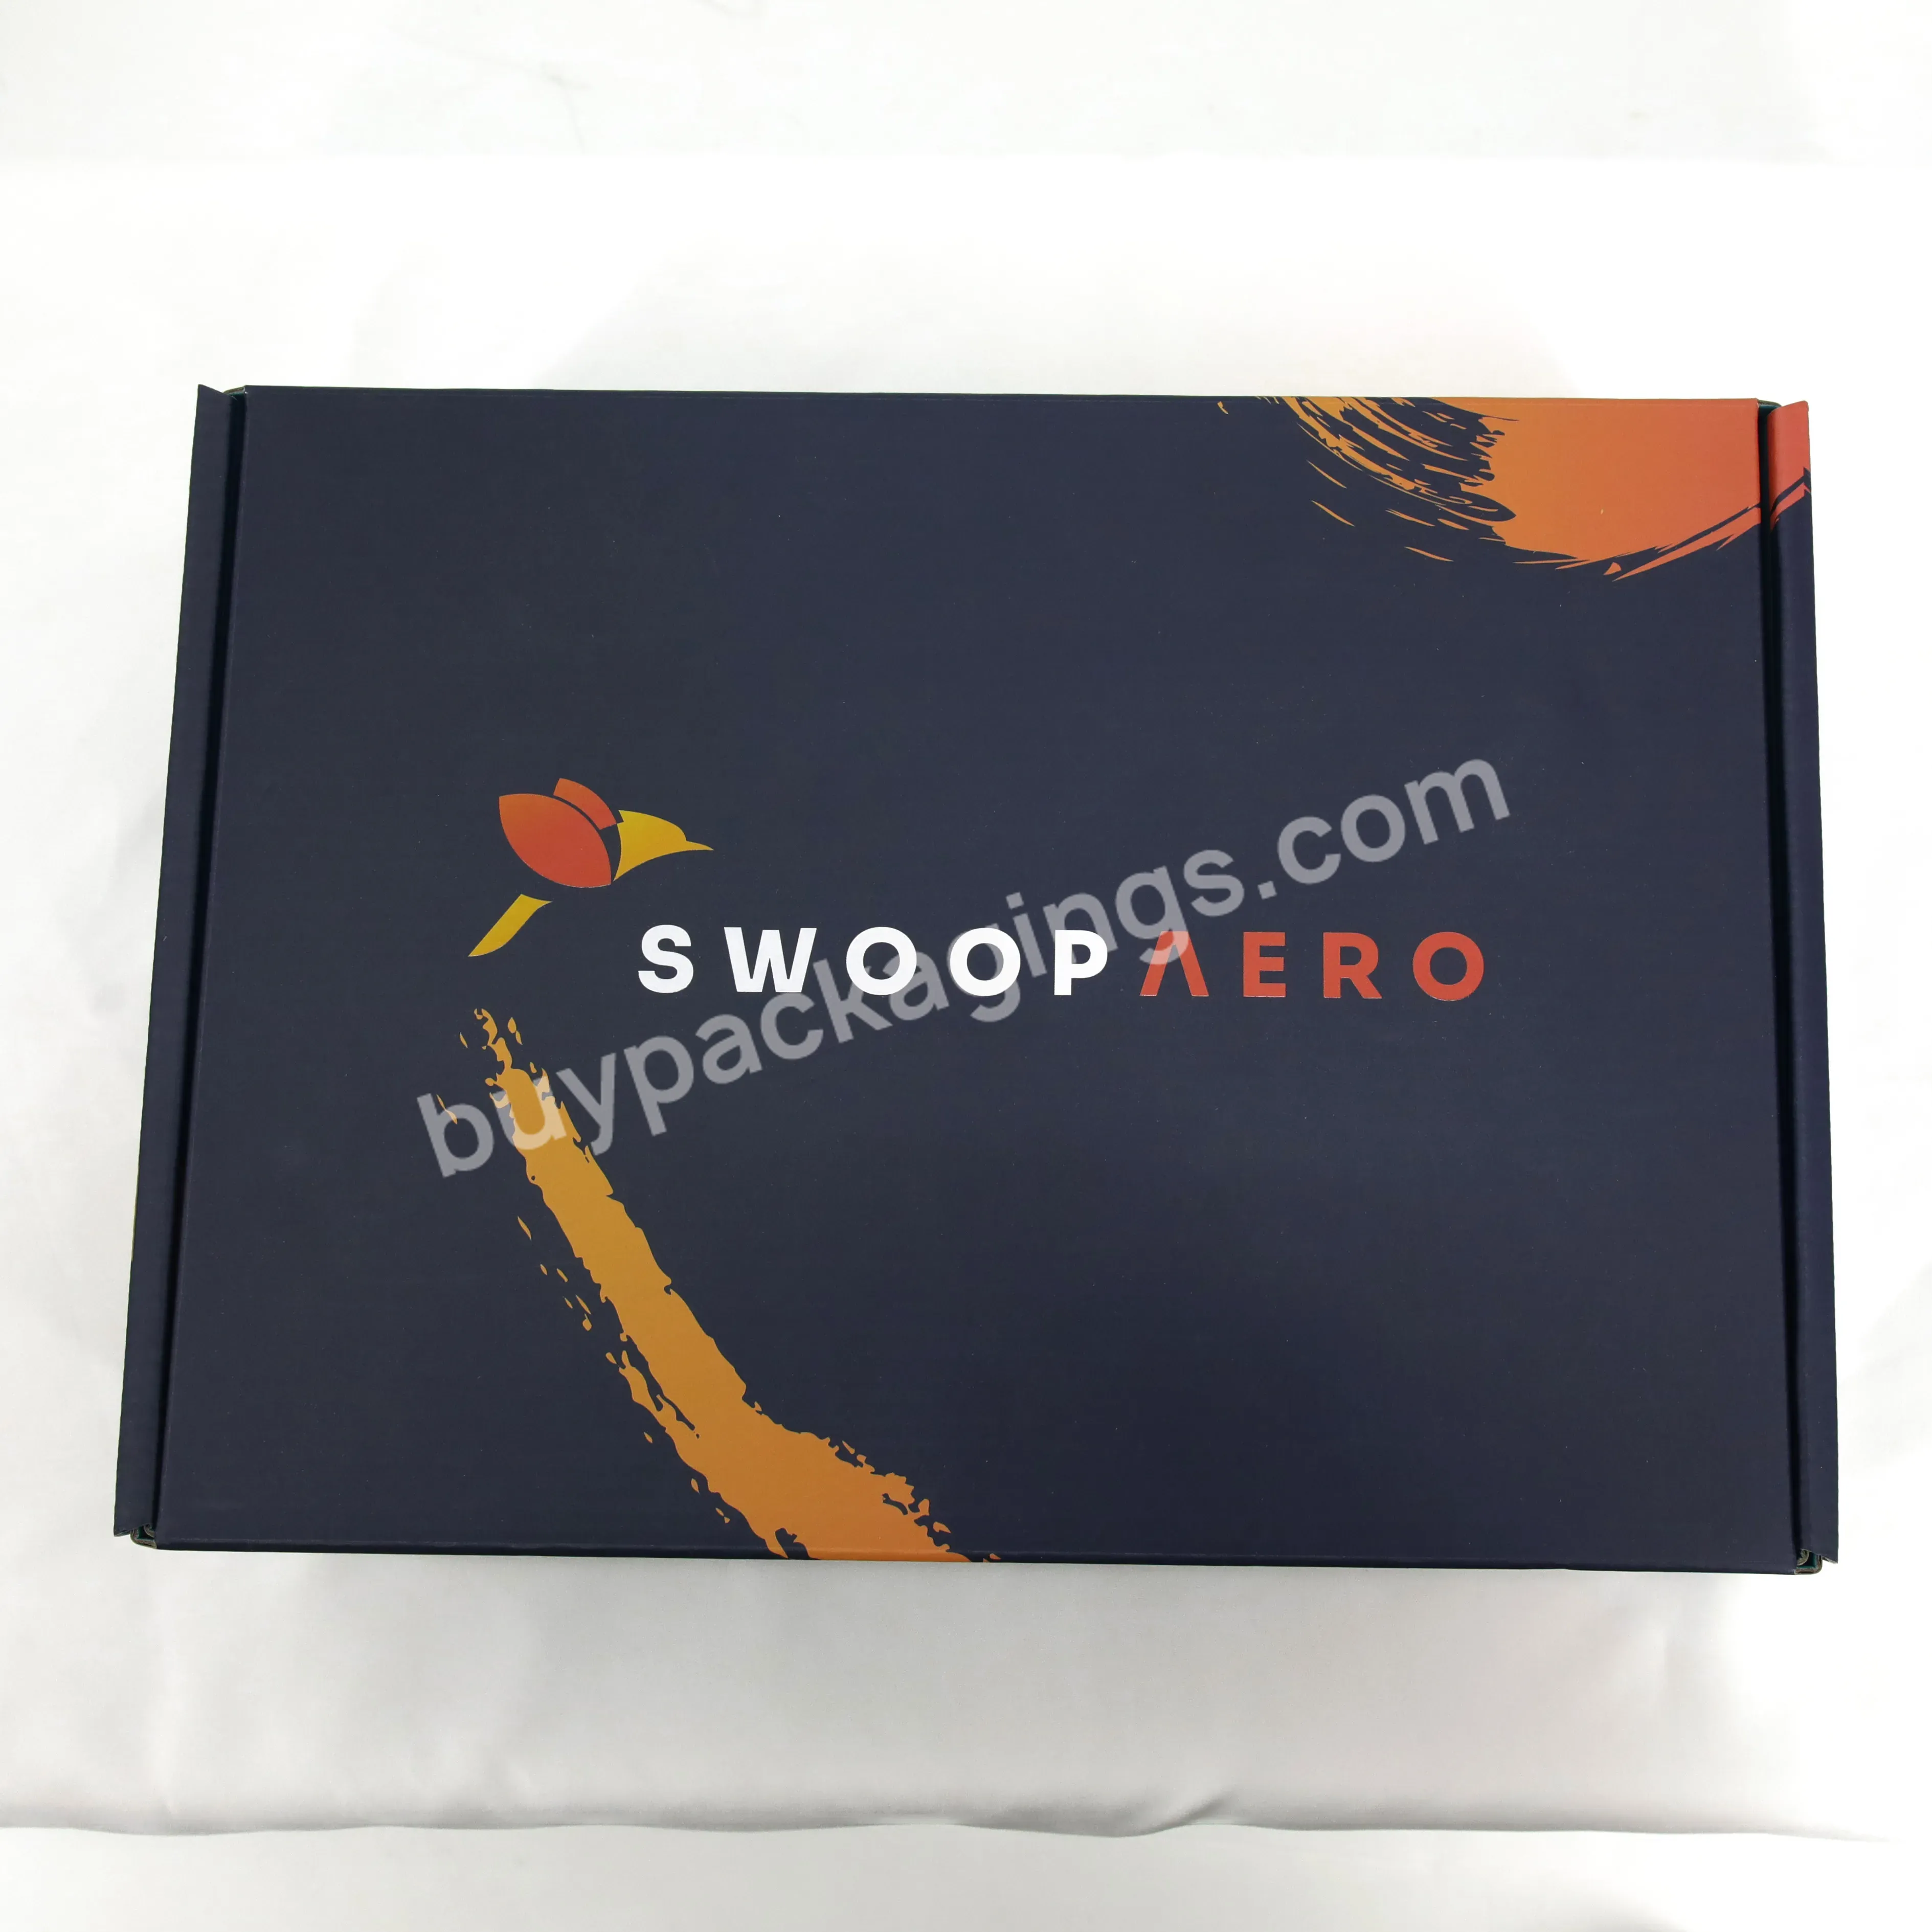 Black Corrugated Airplane Subscription Packaging Box For E-commerce Shipping Mailer Box - Buy Packaging Box For Flowers,Boxes For Shipping Wine Glasses,Cardboard Boxes For Packaging.